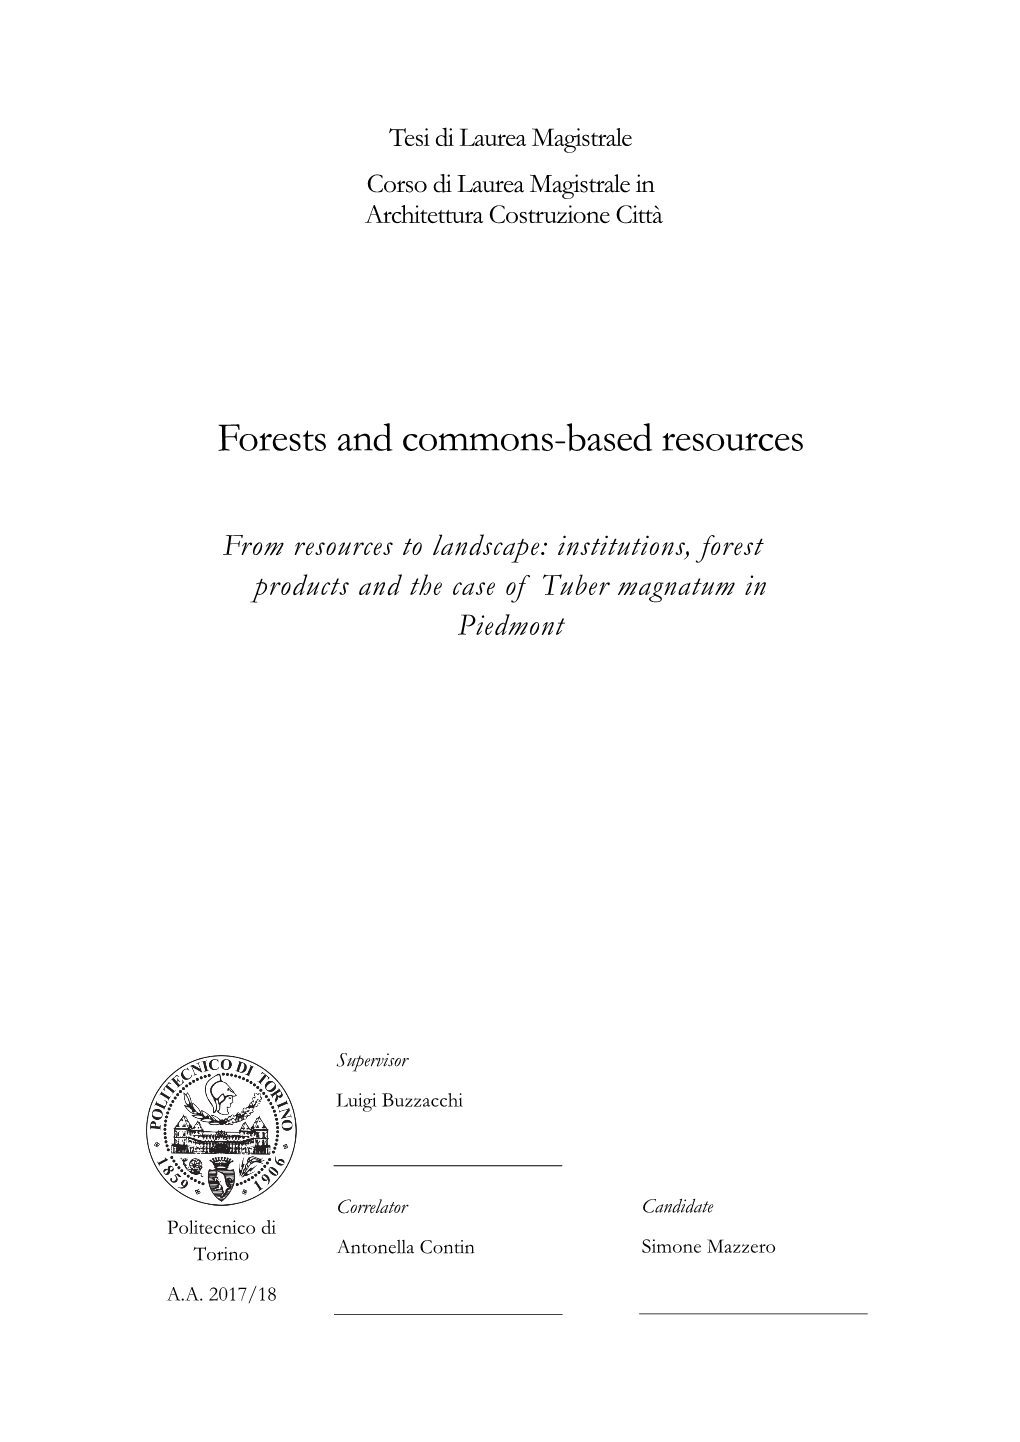 Forests and Commons-Based Resources